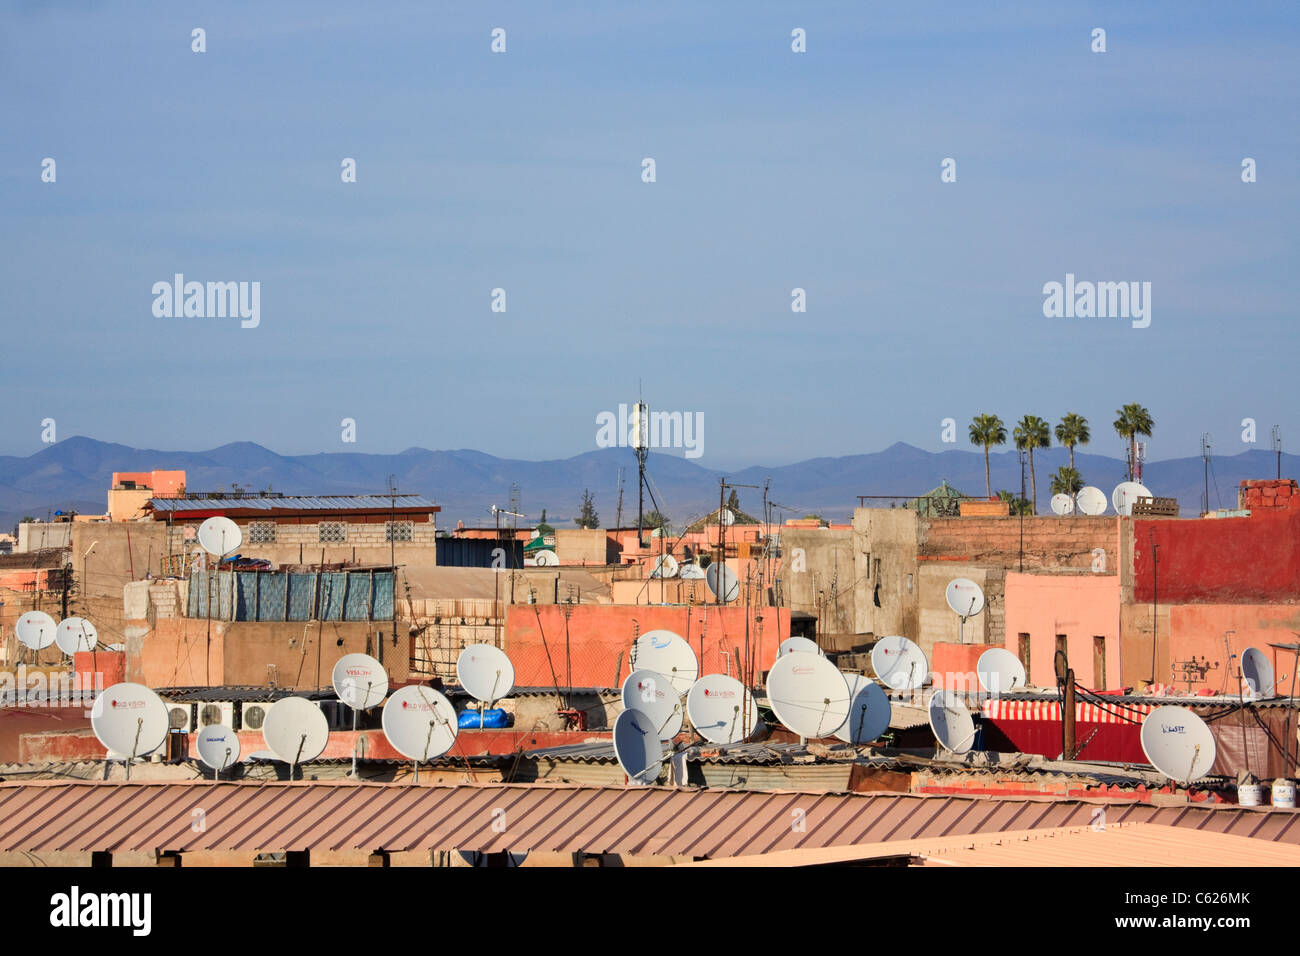 Marrakech Morocco North Africa. Satellite dishes on the rooftops of typical city buildings Stock Photo